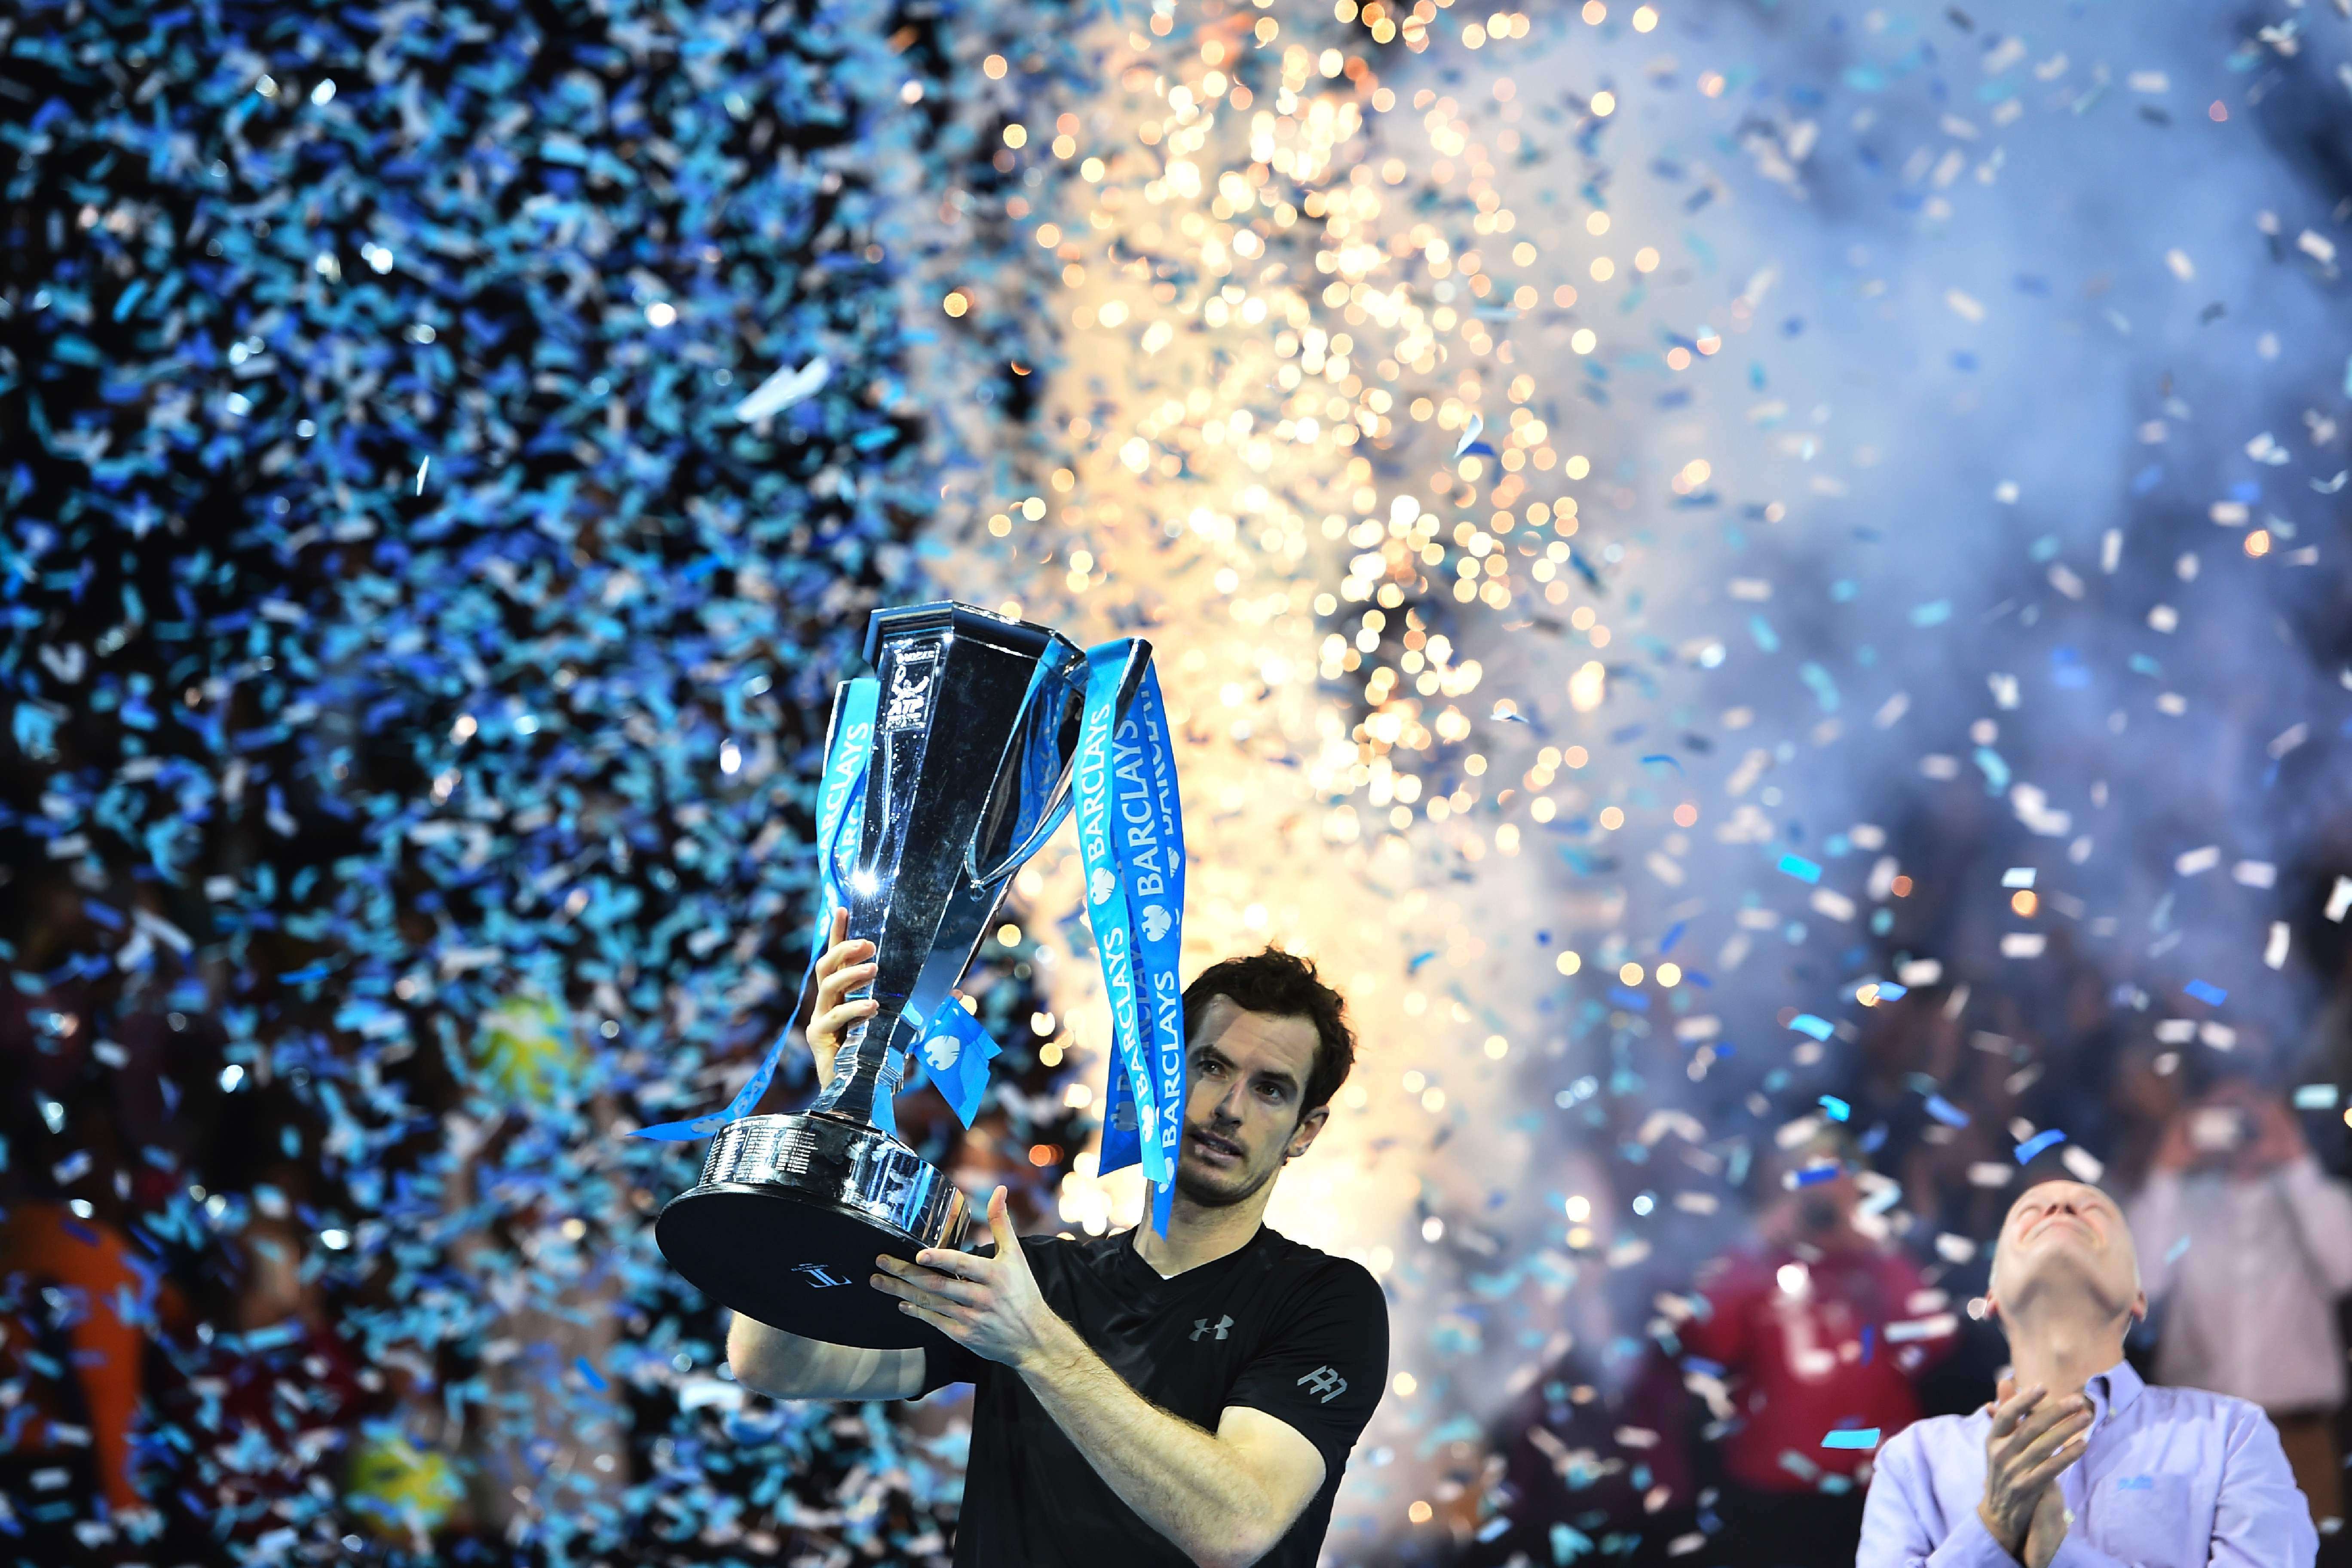 Britain's Andy Murray celebrate with the trophy after winning the men's singles final against Serbia's Novak Djokovic on the eighth and final day of the ATP World Tour Finals tennis tournament in London on November 20, 2016. / AFP PHOTO / Glyn KIRK